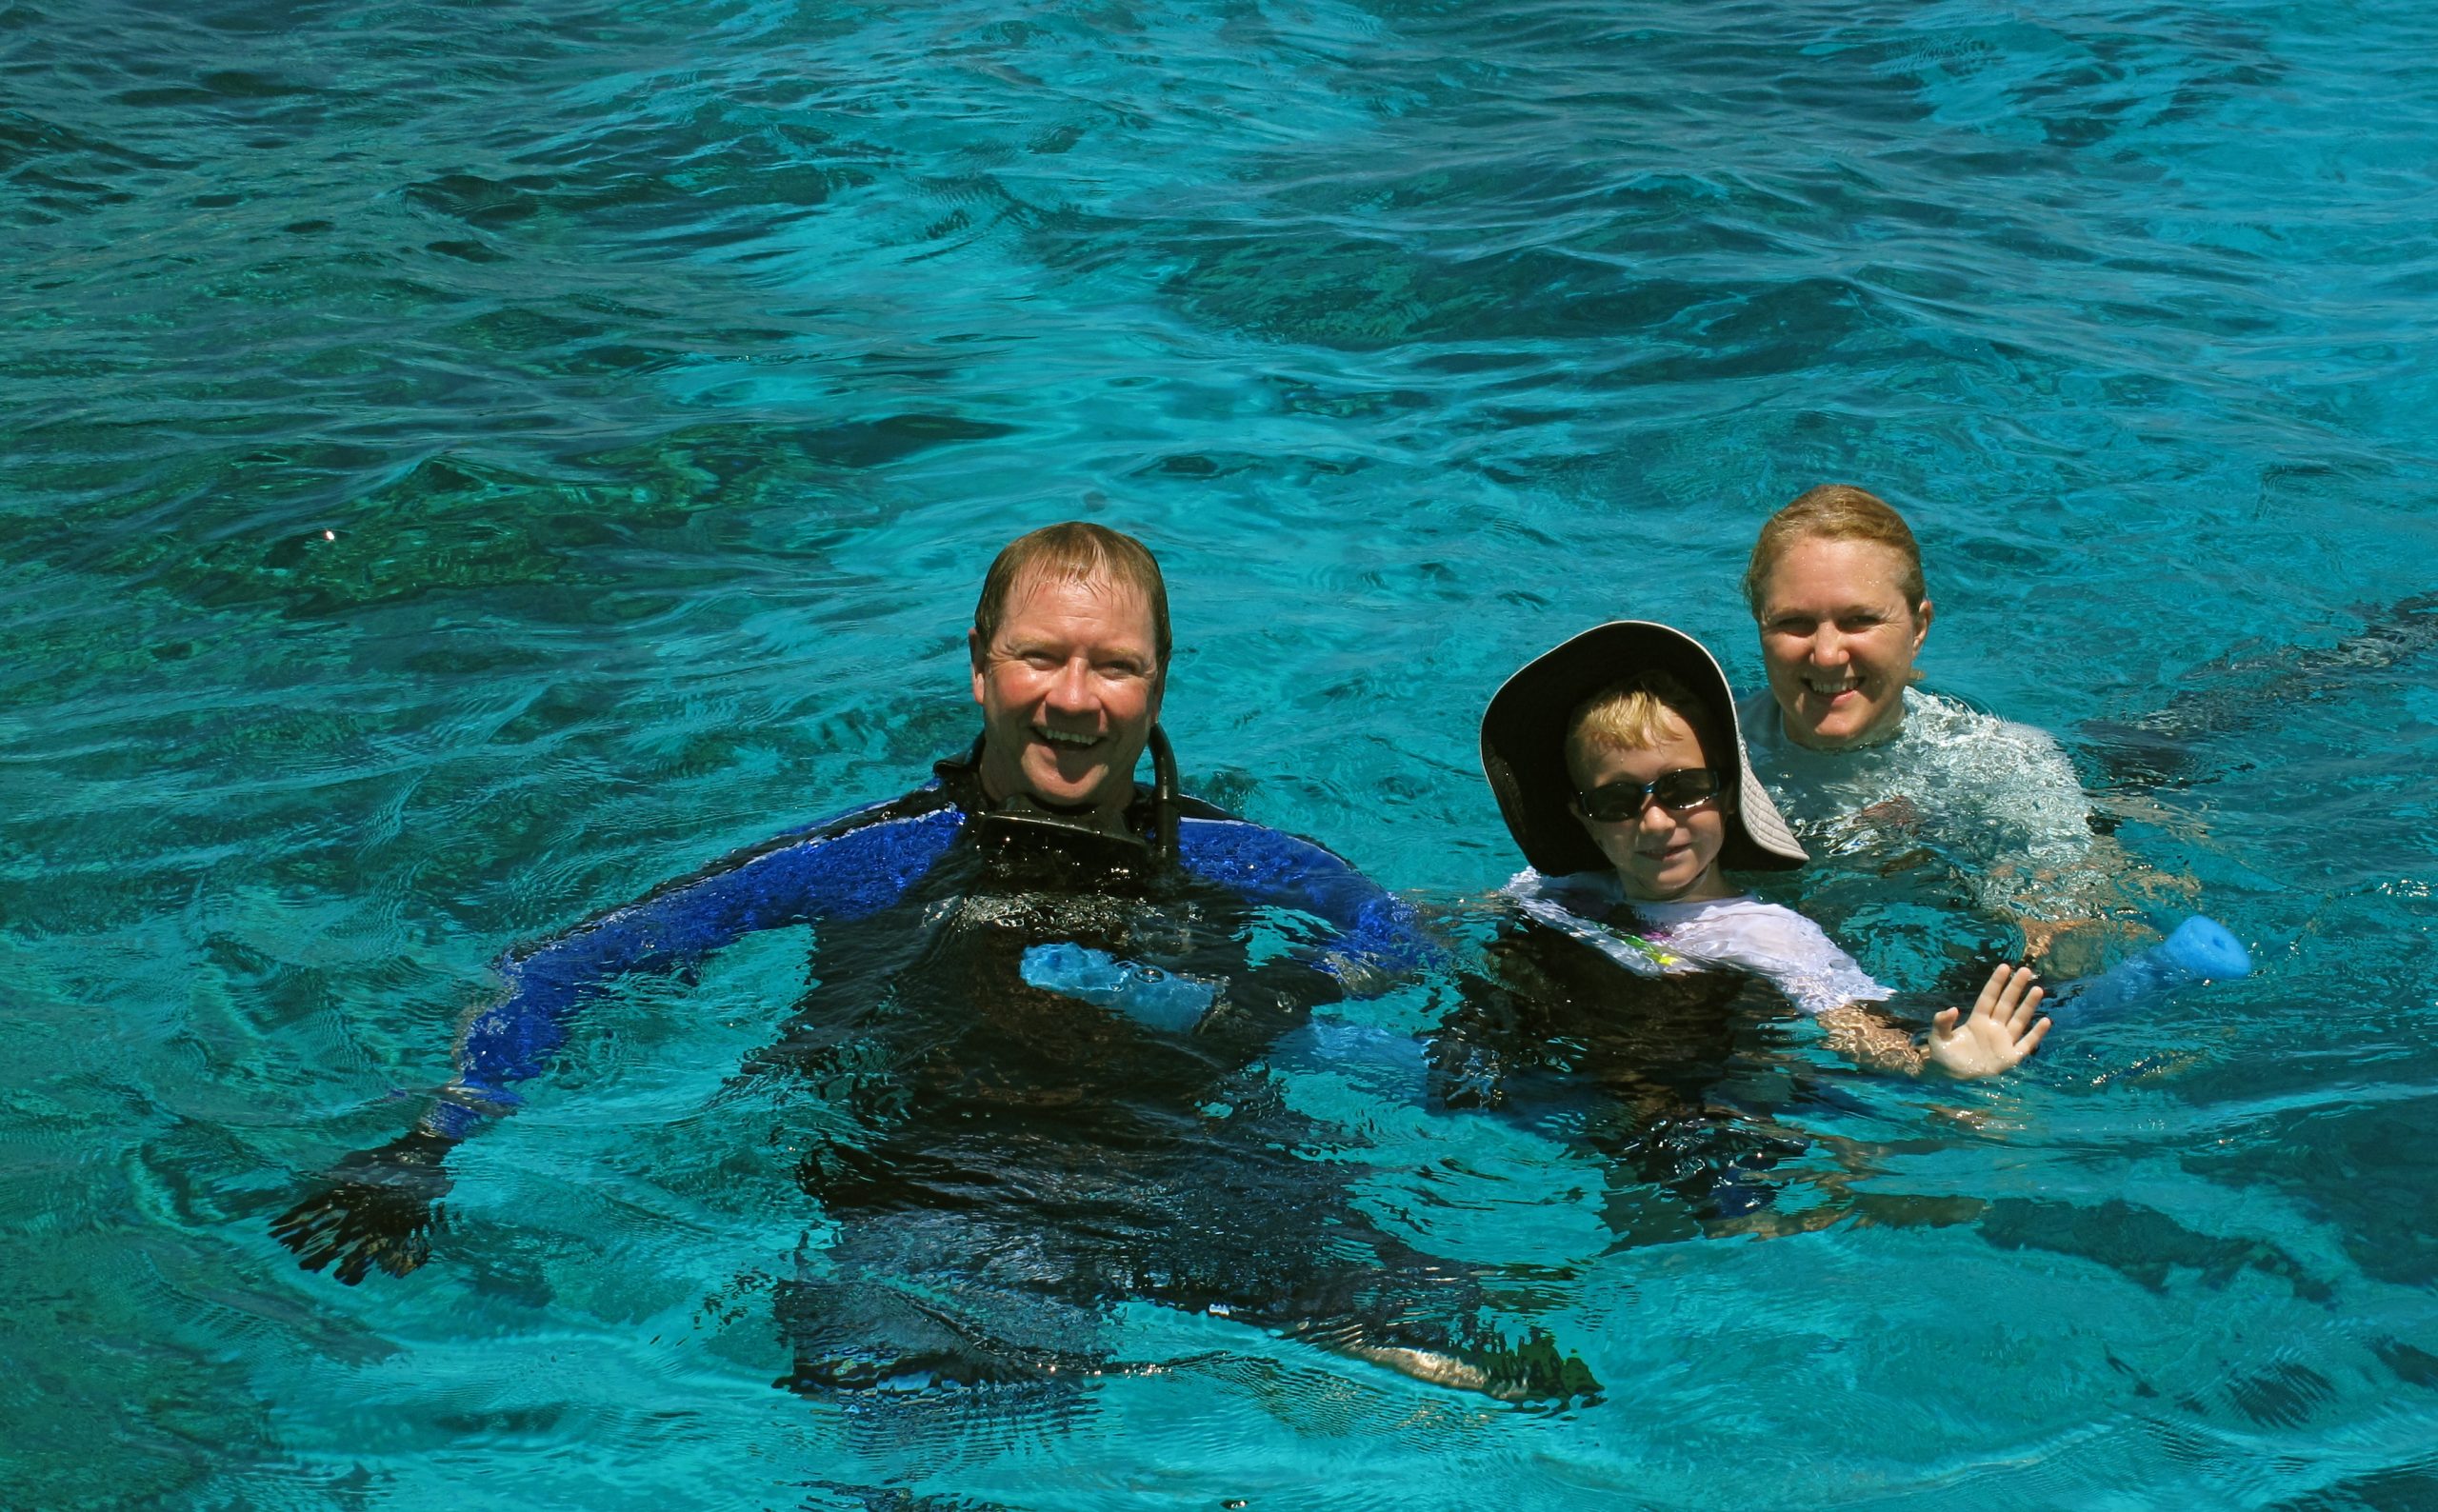 Peter taught sons Lachlan and Cameron (pictured here with his Mum Vicki) how to scuba dive at the Rowley’s.